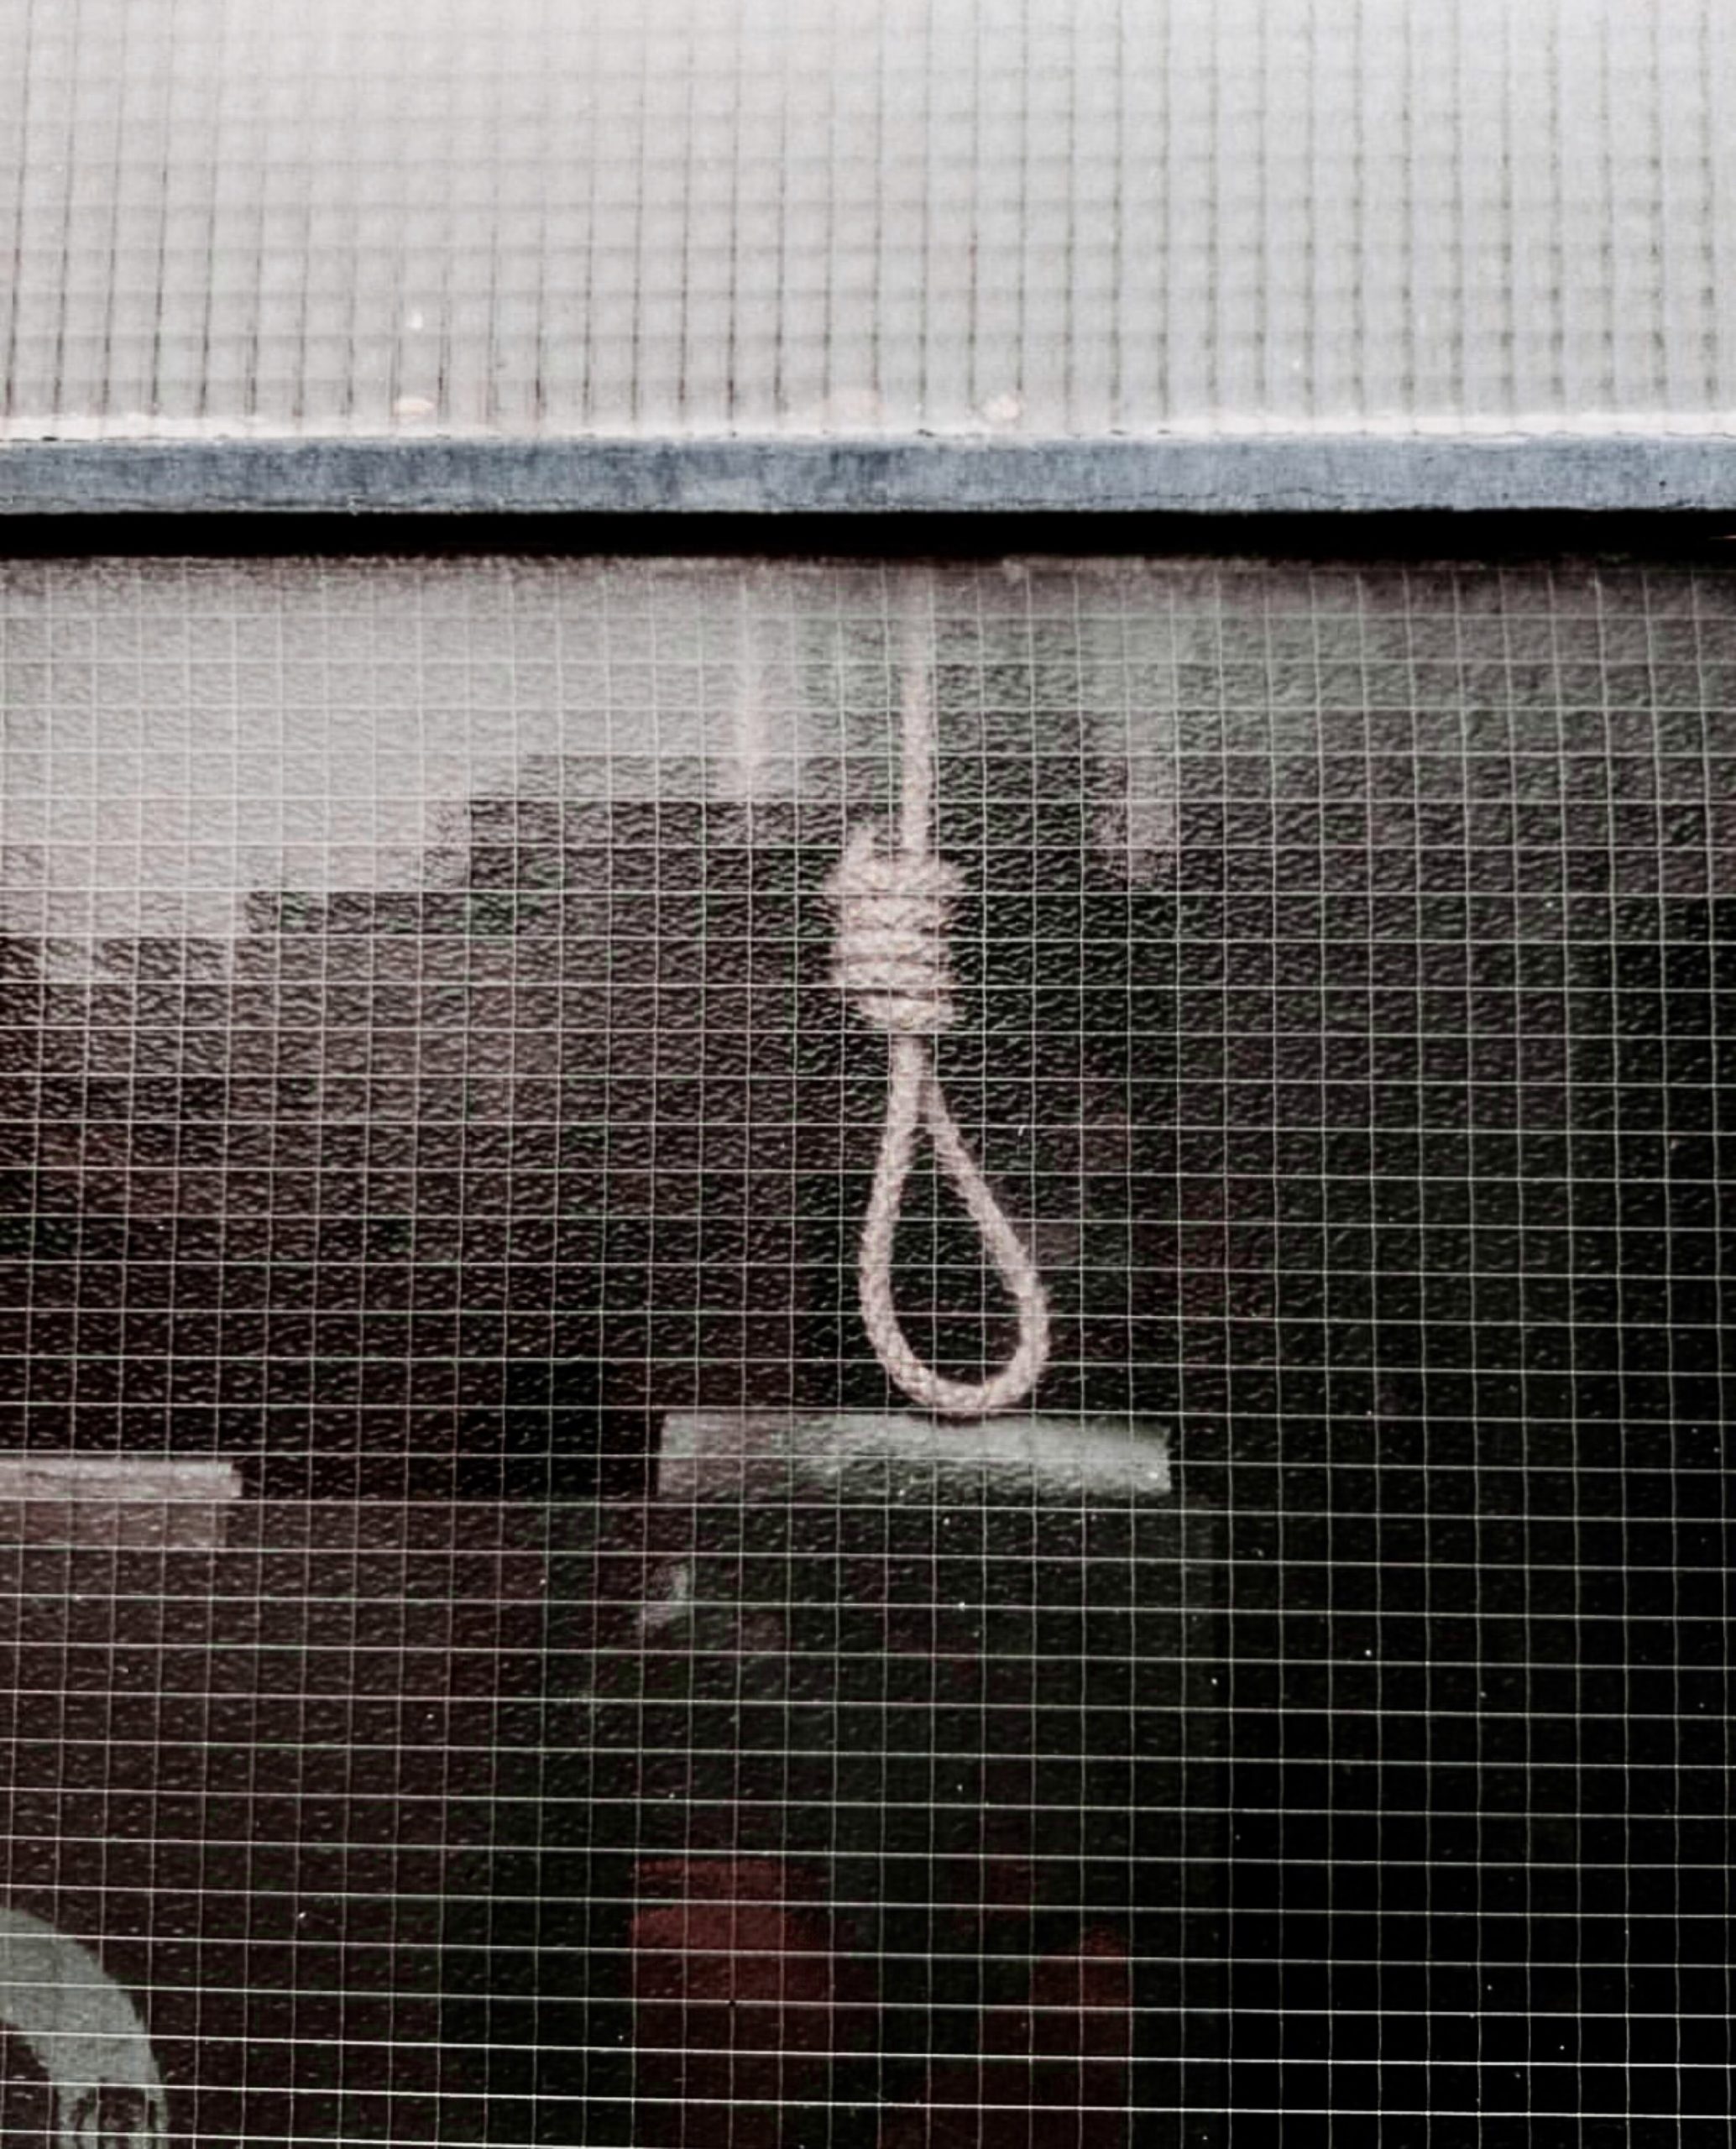 The Malaysian government has agreed to abolish the mandatory death penalty. 